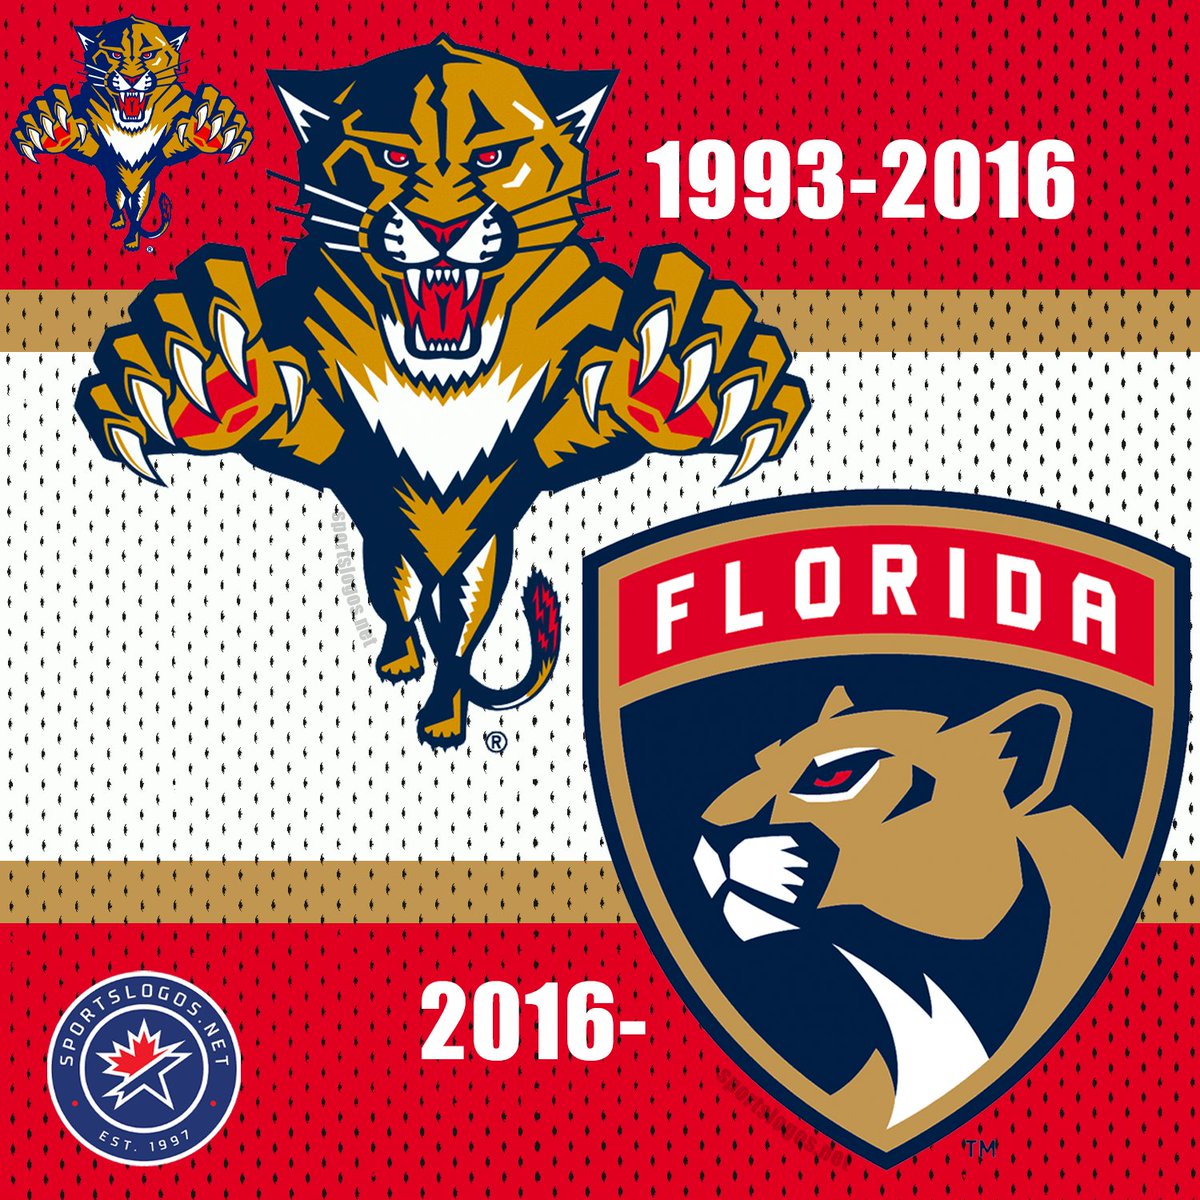 Choose your Florida Panthers logo: Original leaping panther or the modern-day shield? Vote in the poll below https://t.co/QBY7fsguZ1